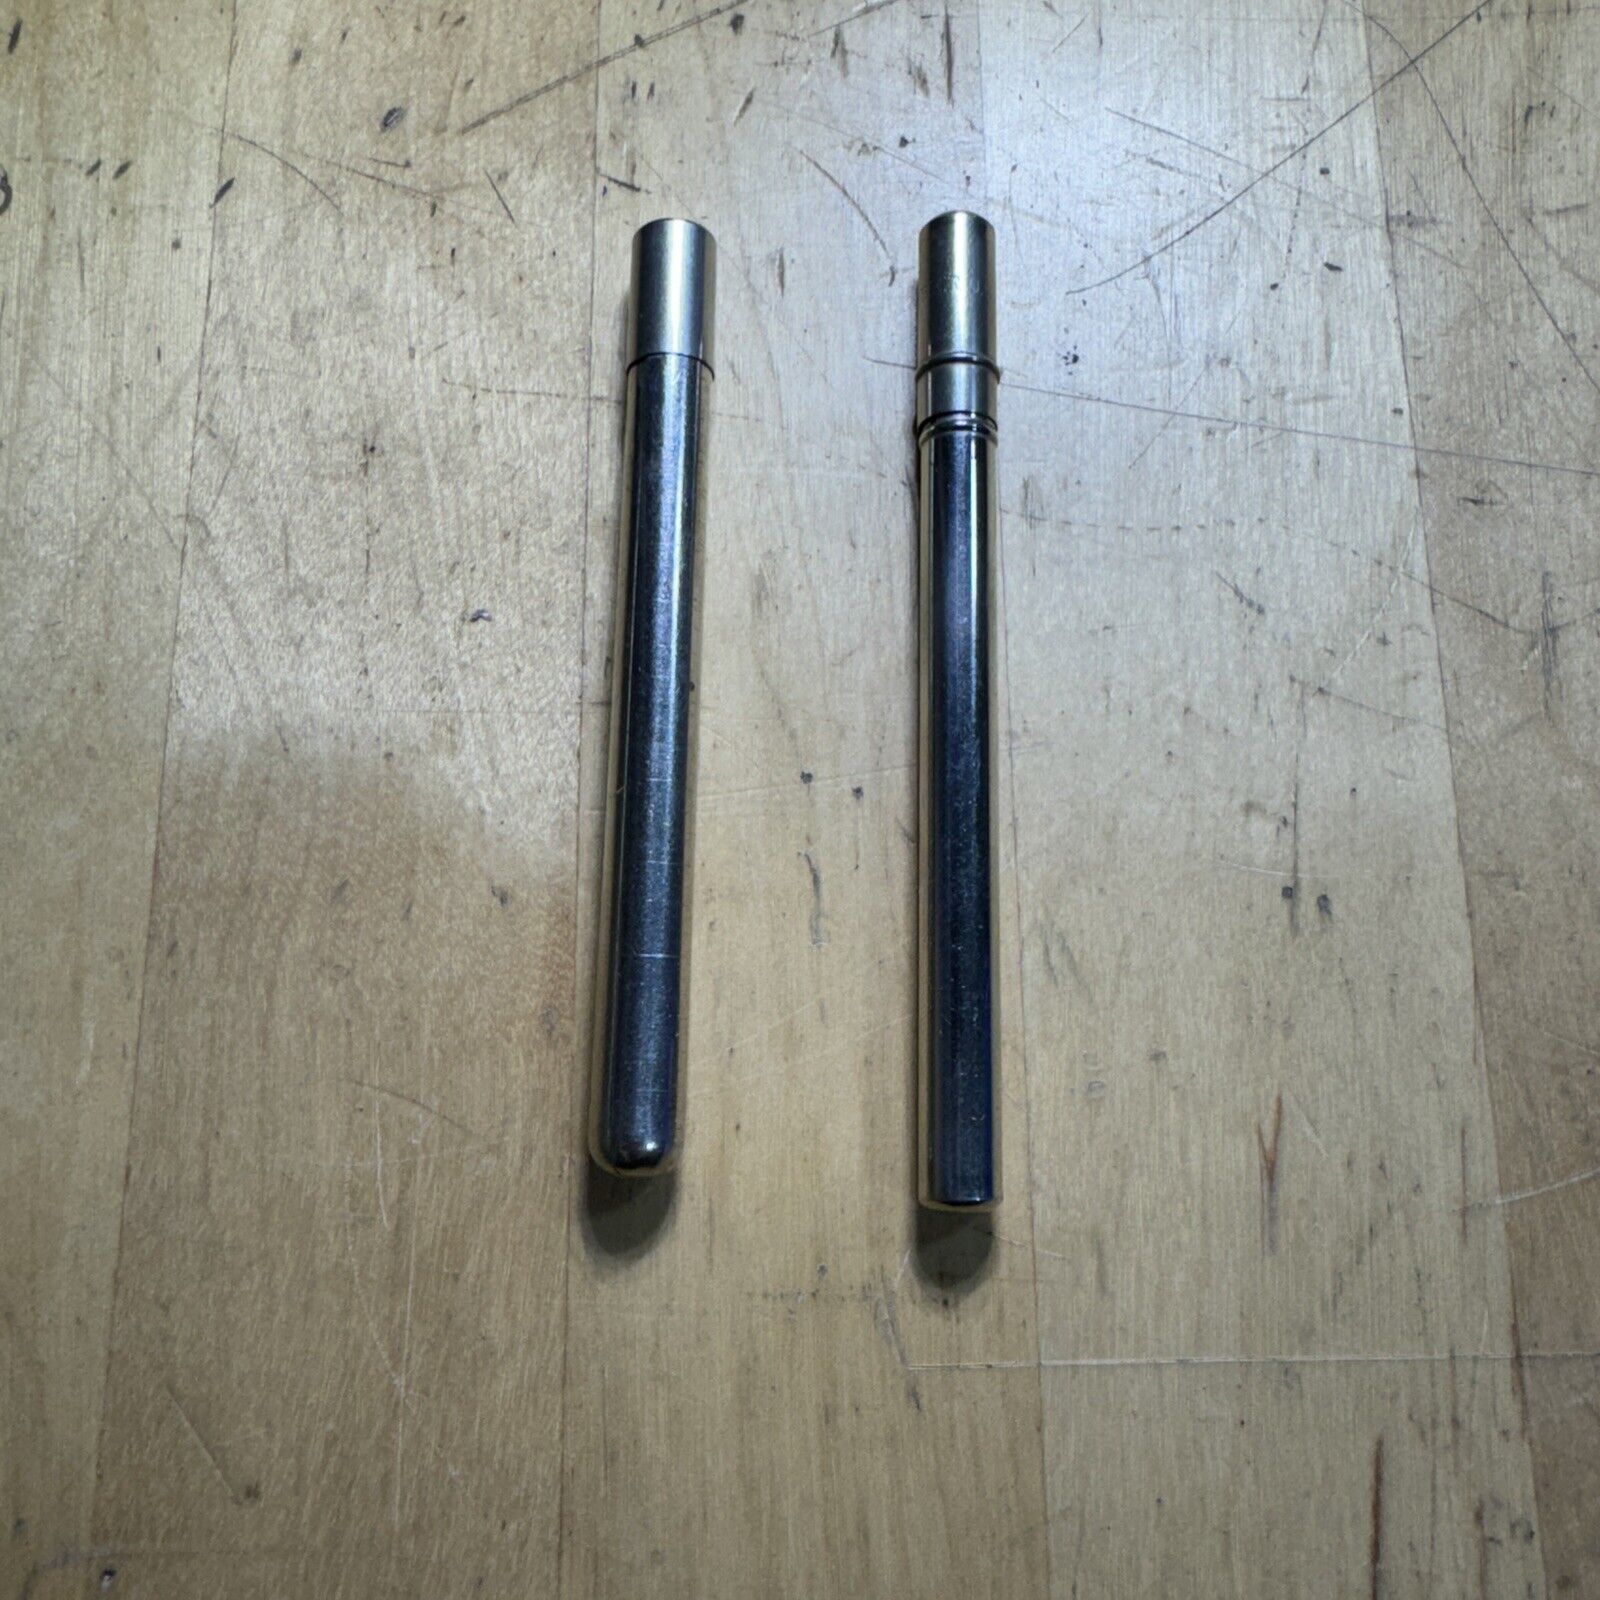 Lot of 2 - Vintage E. Faber Drafting Pencil Lead Graphite Holder - Unknown One